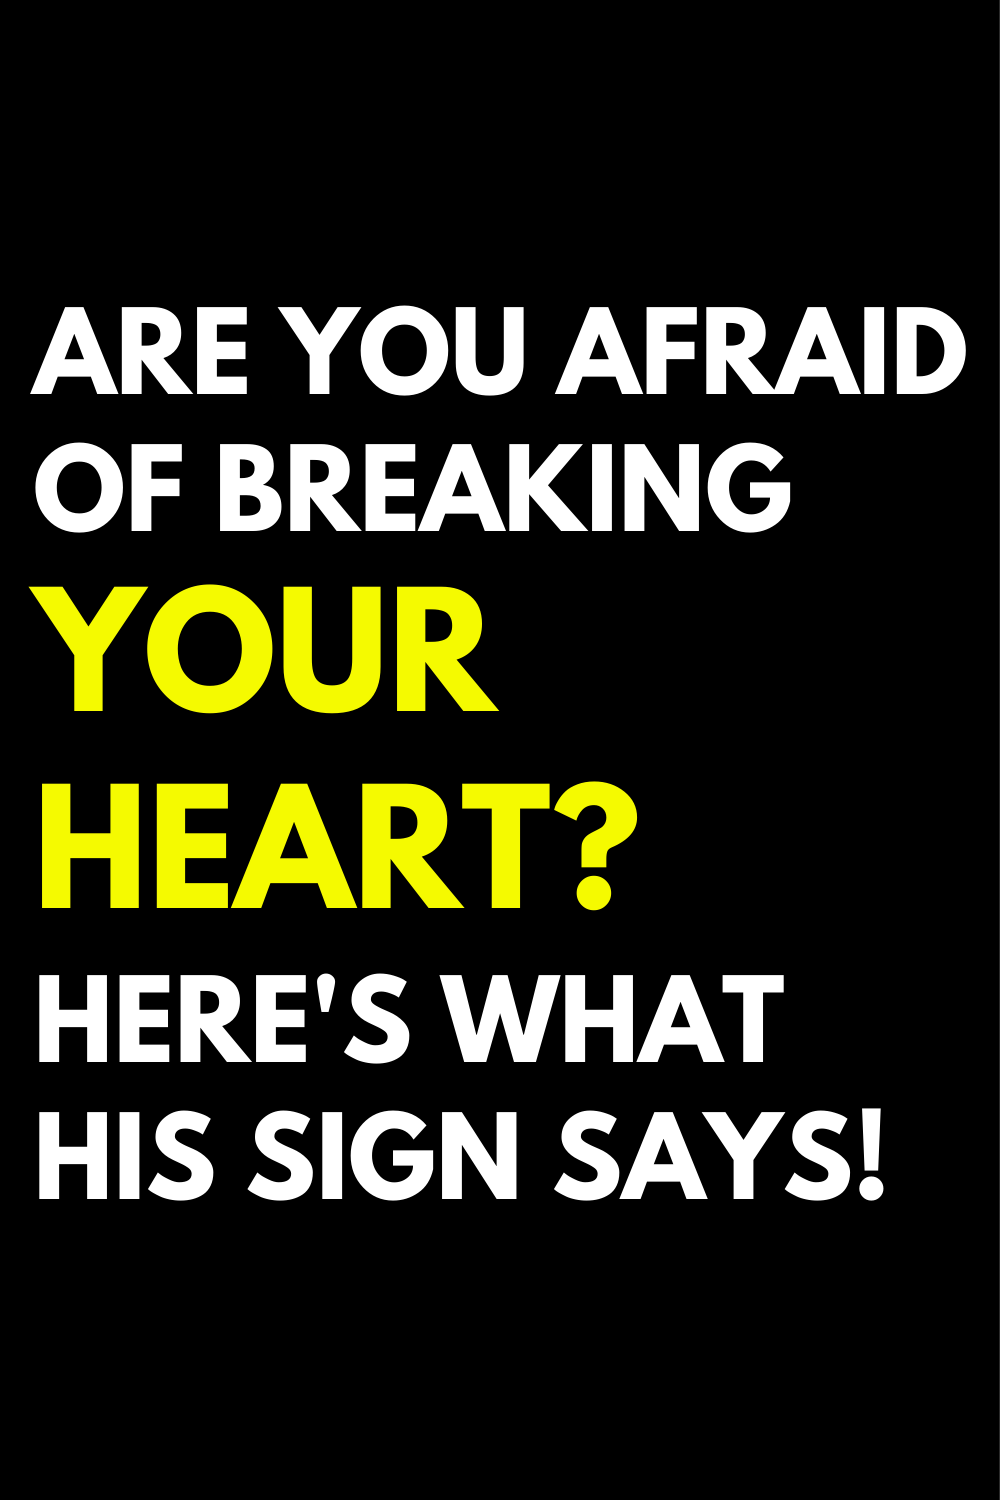 Are you afraid of breaking your heart? Here's what his sign says!